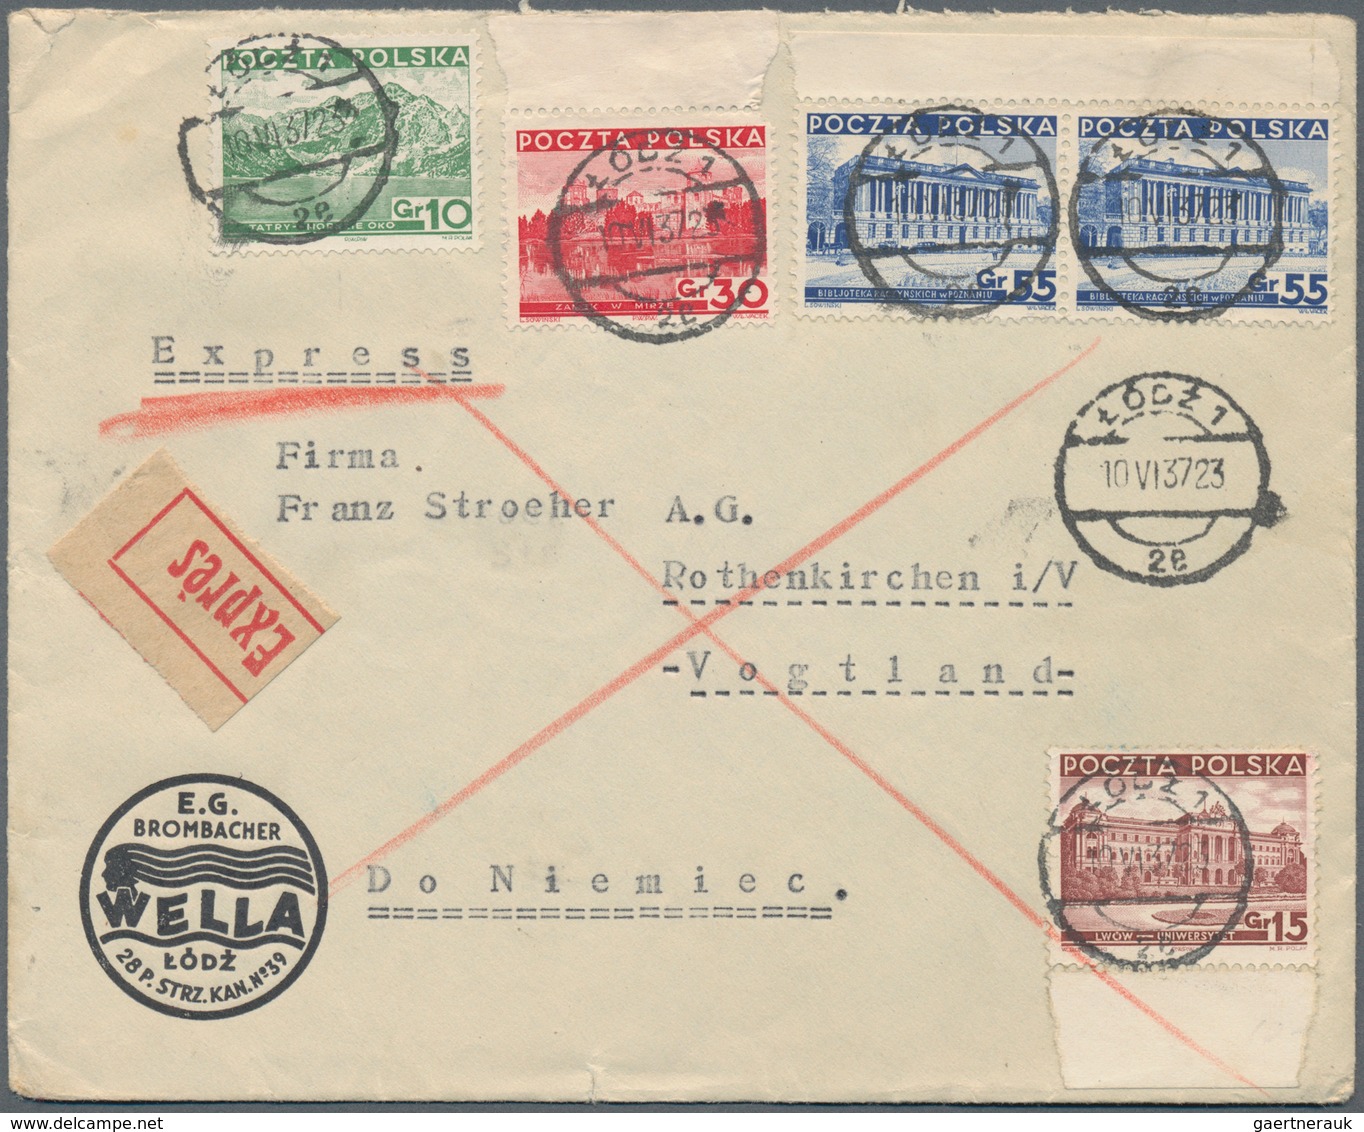 Polen: 1850/1954, covers/cards inc. prephilately (7, all Warszawa to Champaign producer Roederer Rei